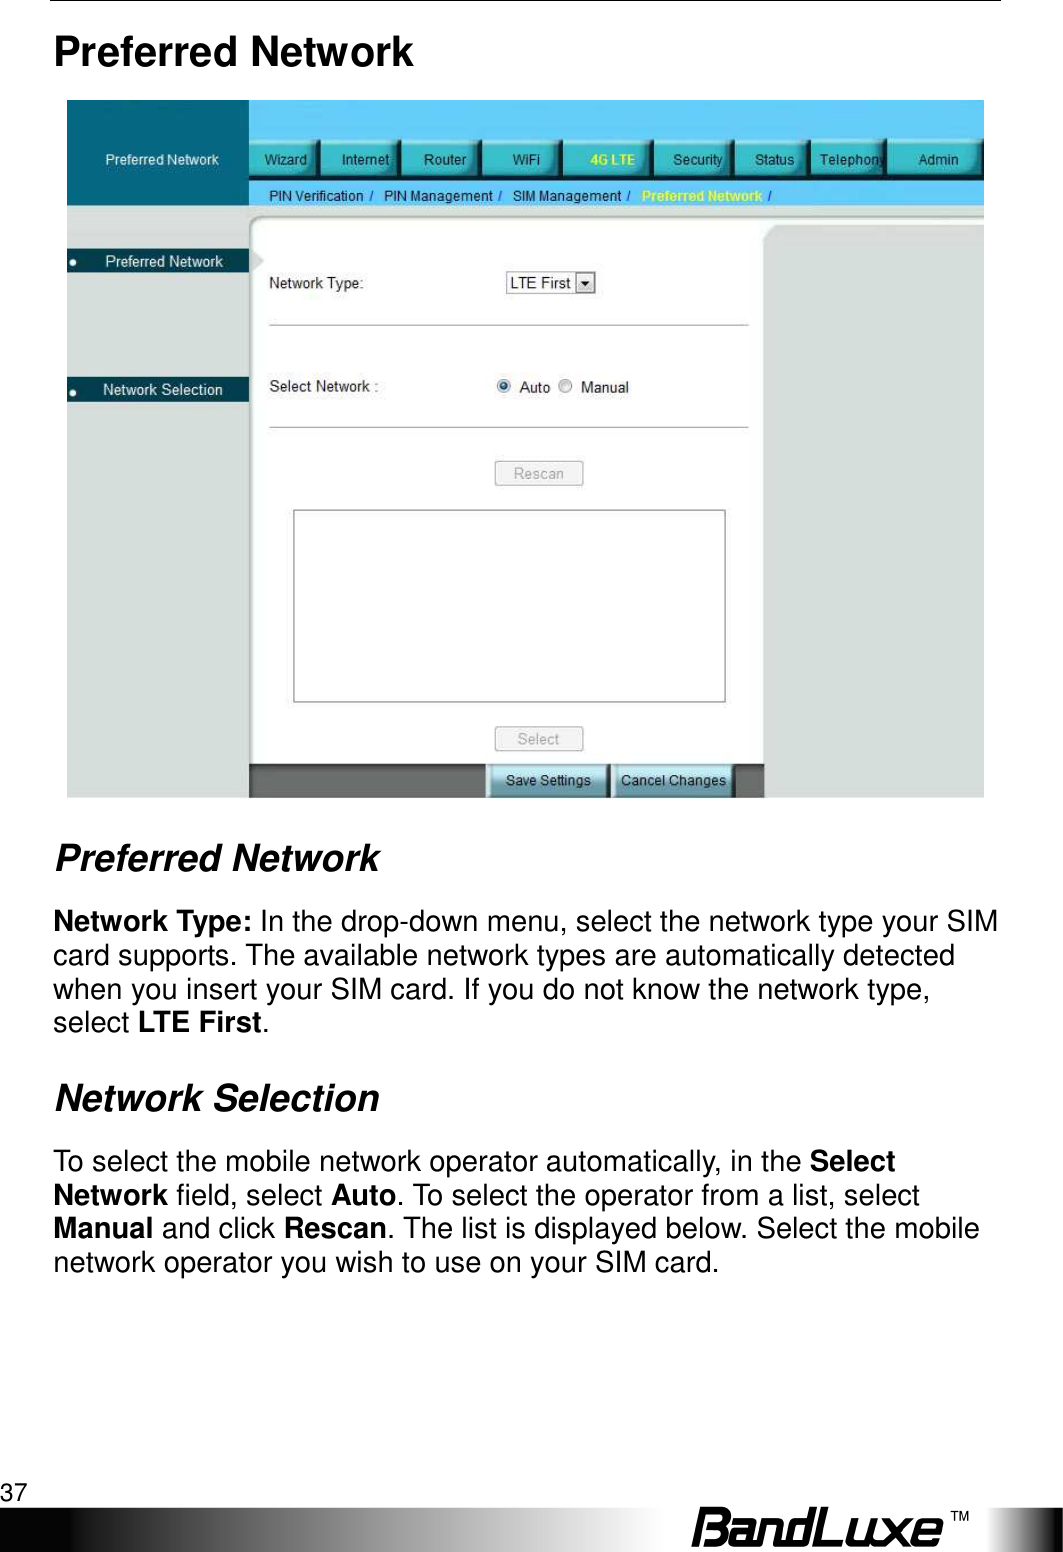   4G LTE Setup 37 Preferred Network  Preferred Network Network Type: In the drop-down menu, select the network type your SIM card supports. The available network types are automatically detected when you insert your SIM card. If you do not know the network type, select LTE First. Network Selection To select the mobile network operator automatically, in the Select Network field, select Auto. To select the operator from a list, select Manual and click Rescan. The list is displayed below. Select the mobile network operator you wish to use on your SIM card. 